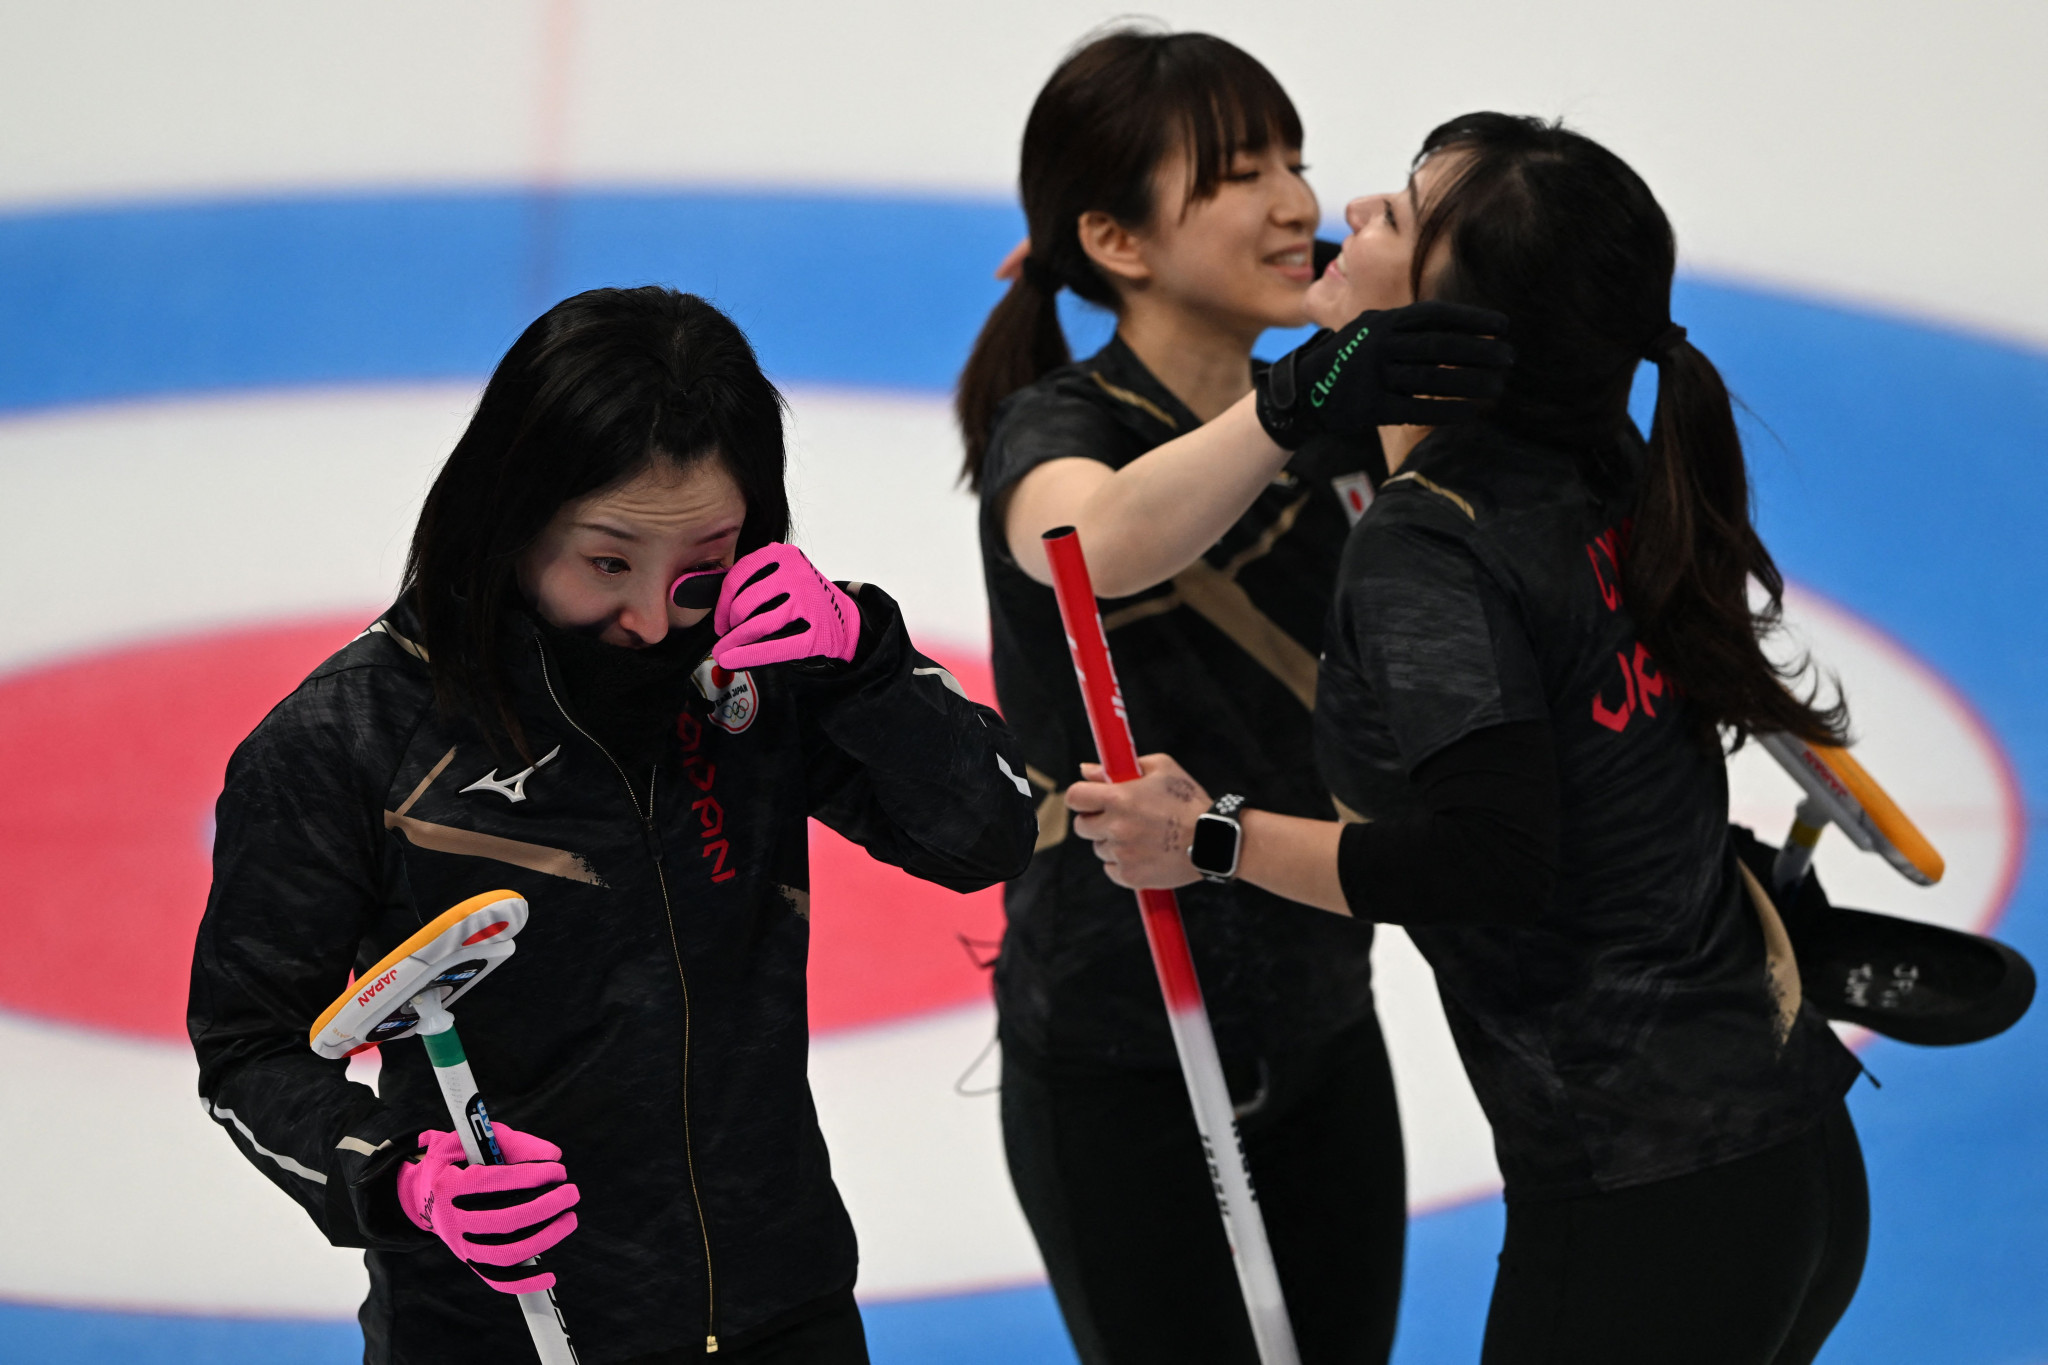 Japan's women claimed the silver medal at the Beijing 2022 Winter Olympics ©Getty Images